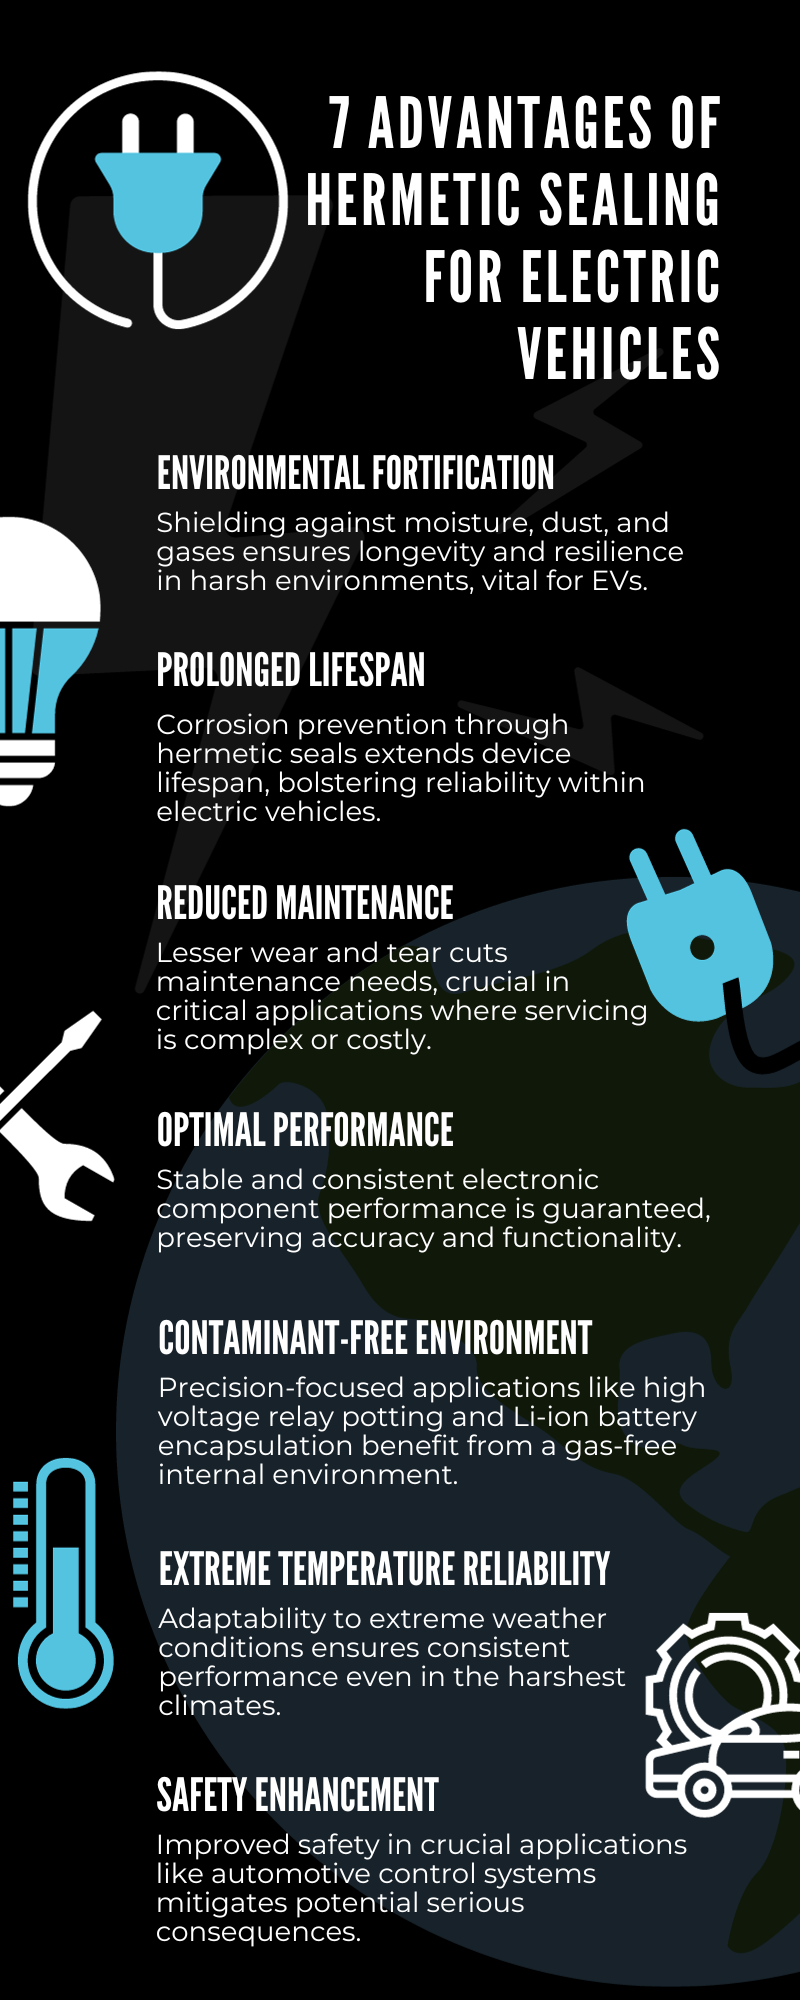 Advantages of hermetic sealing infographic